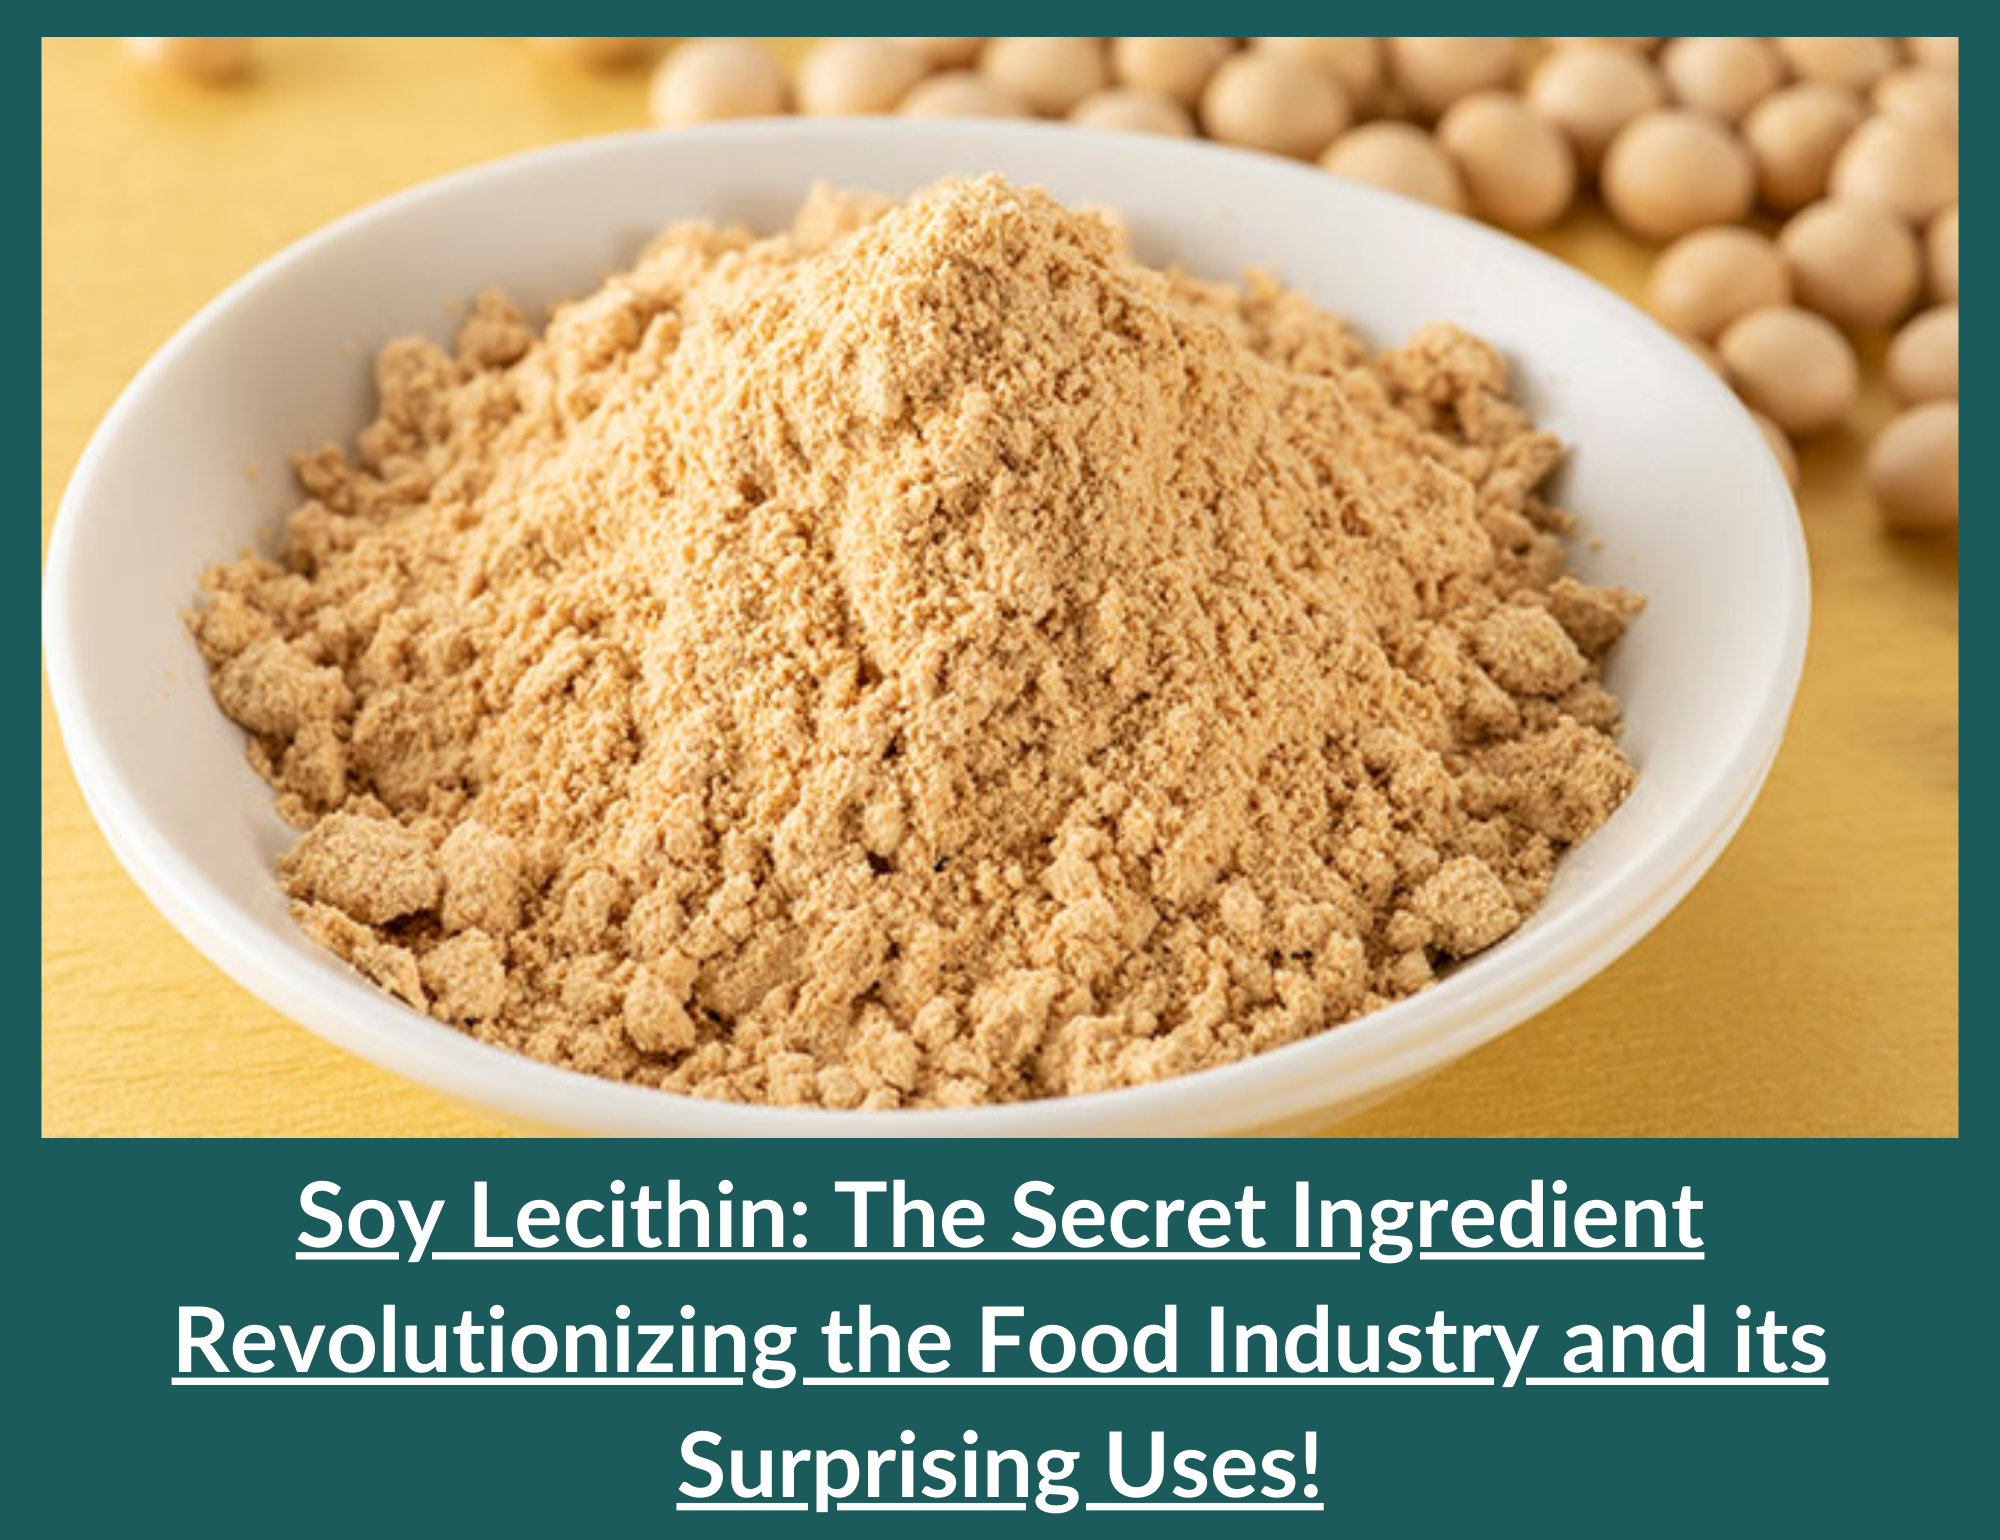 Soy Lecithin applications